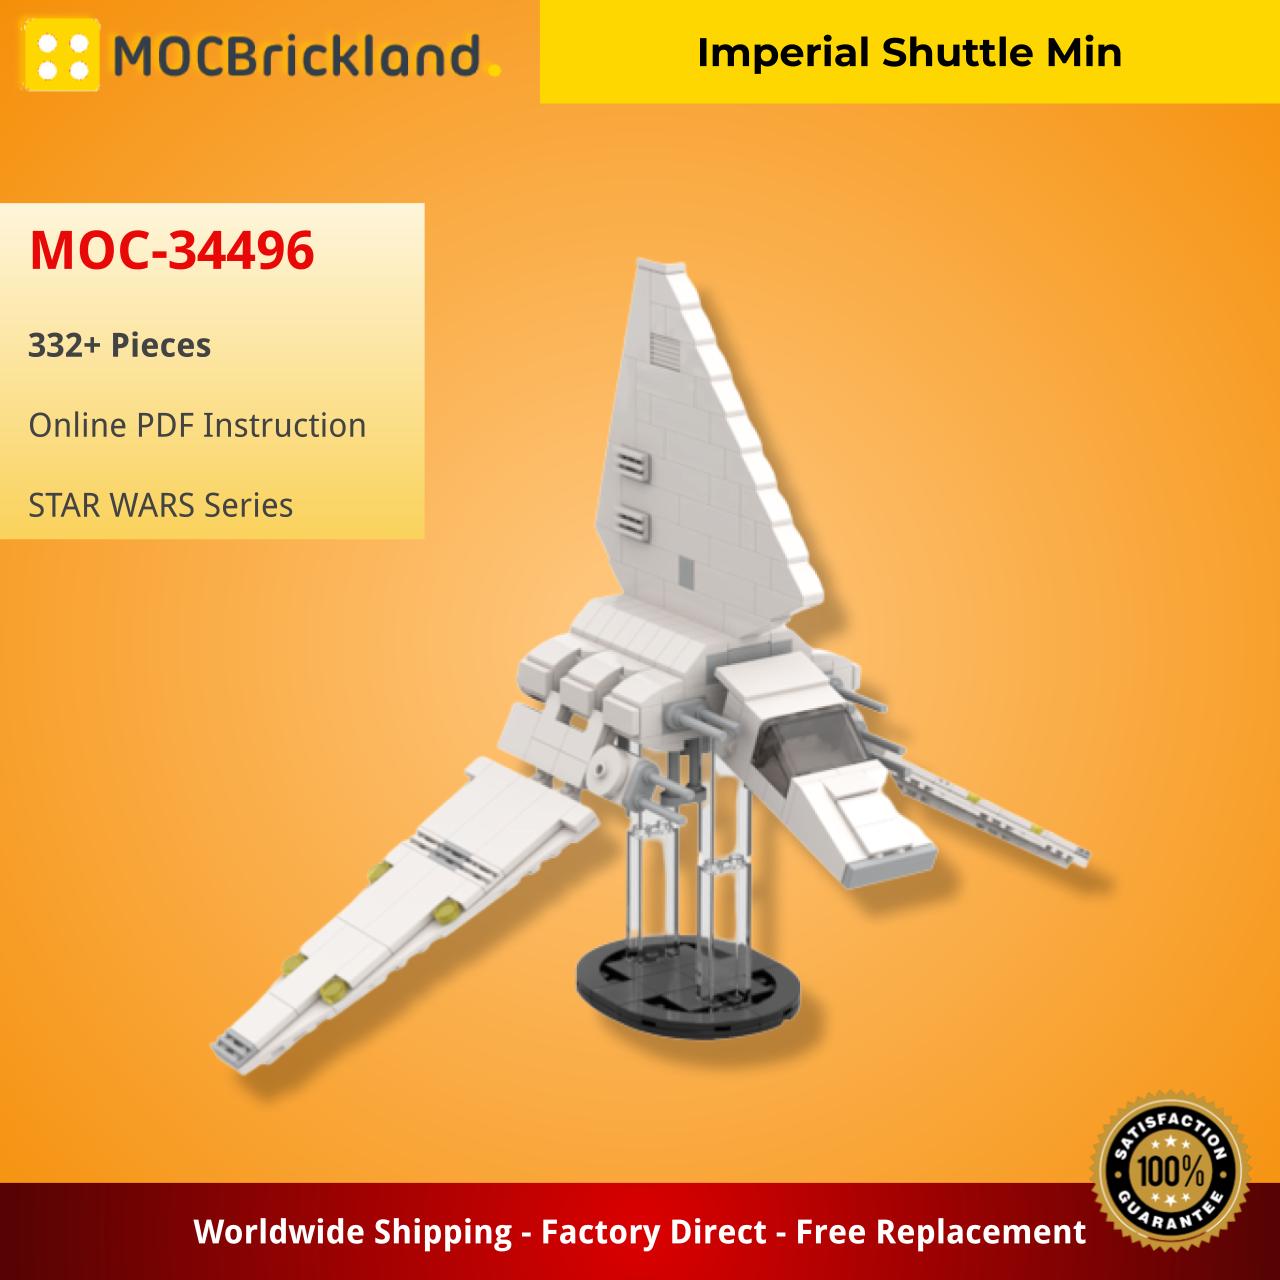 Imperial Shuttle Min Star Wars Moc-34496 With 332 Pieces - Moc Brick Land